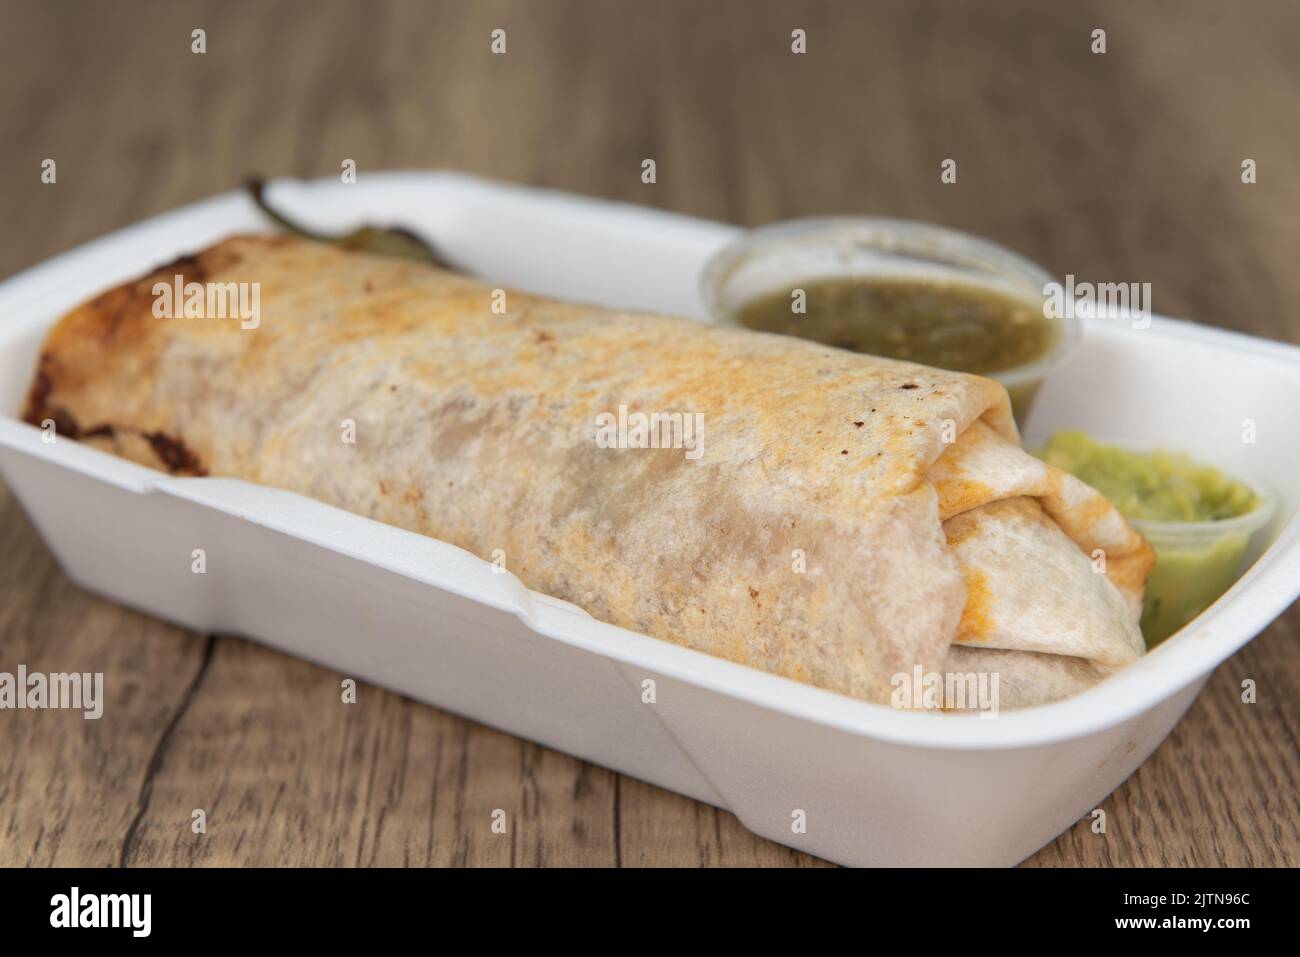 Loaded mexican cuisine burrito, bulging at the flour tortilla and served with a grilled jalapeno, salsa, and guacamole. Stock Photo